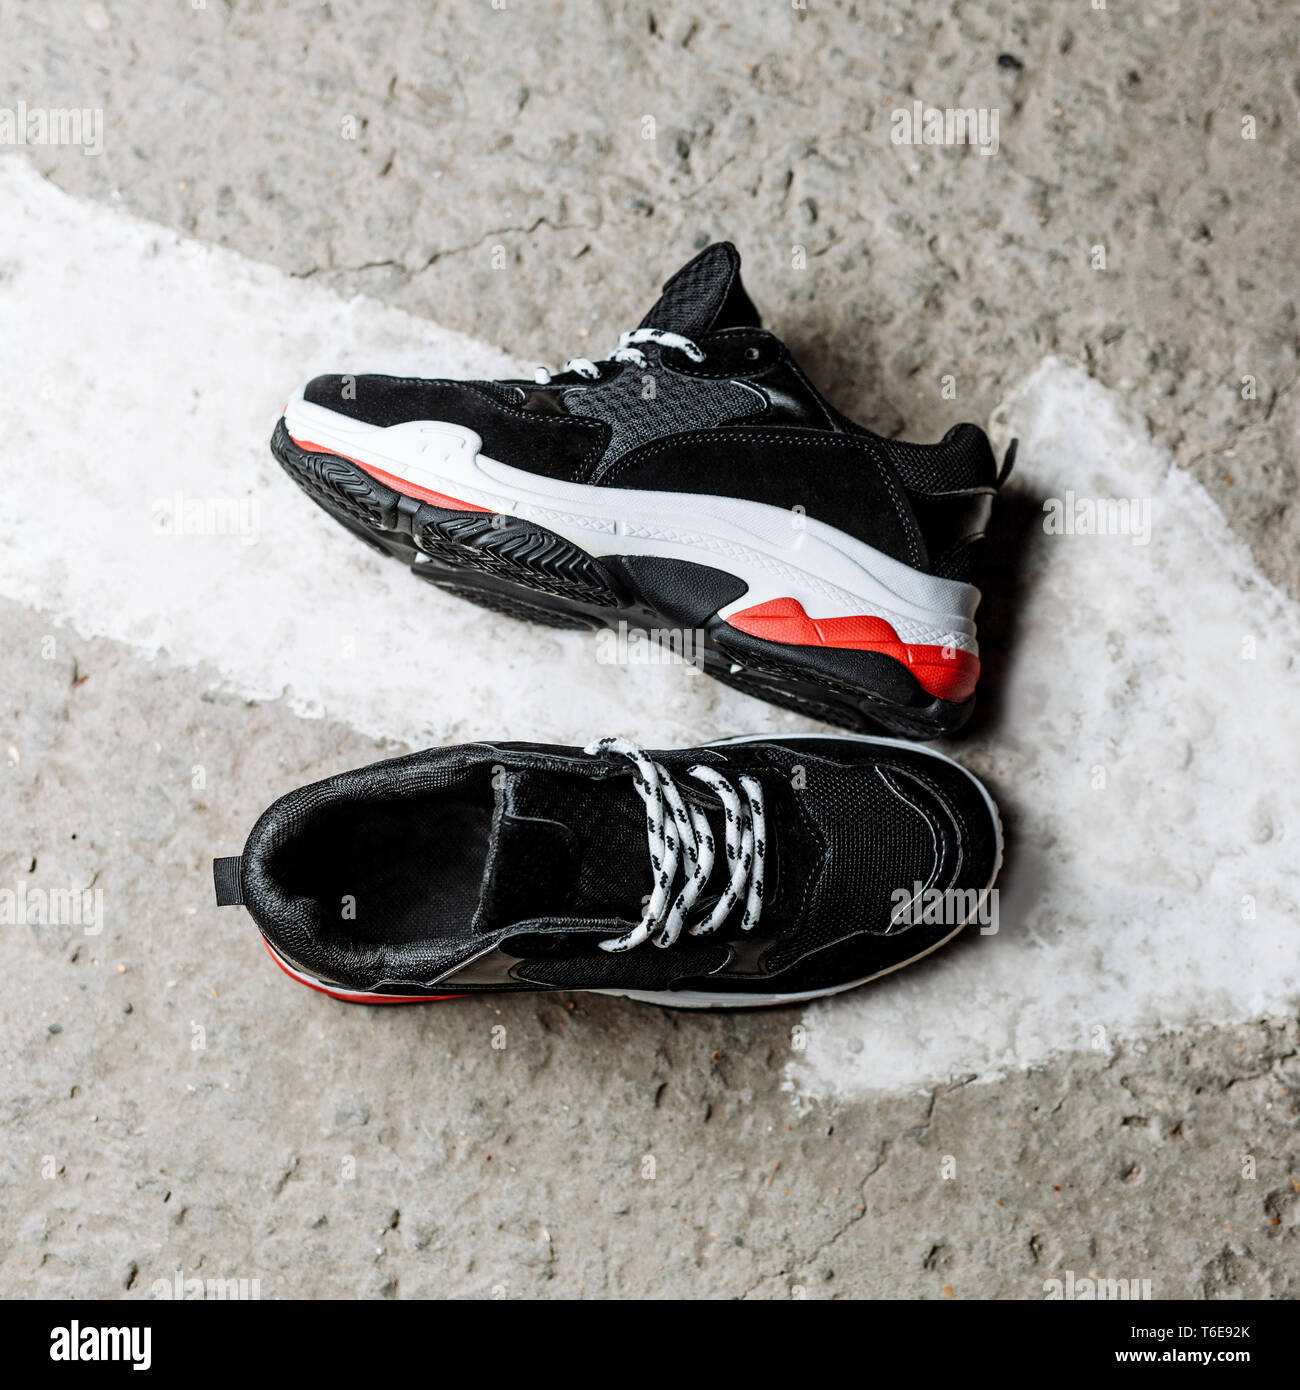 black sneakers with white laces on a thick white sole with red accents on a  concrete background near a painted white arrow Stock Photo - Alamy